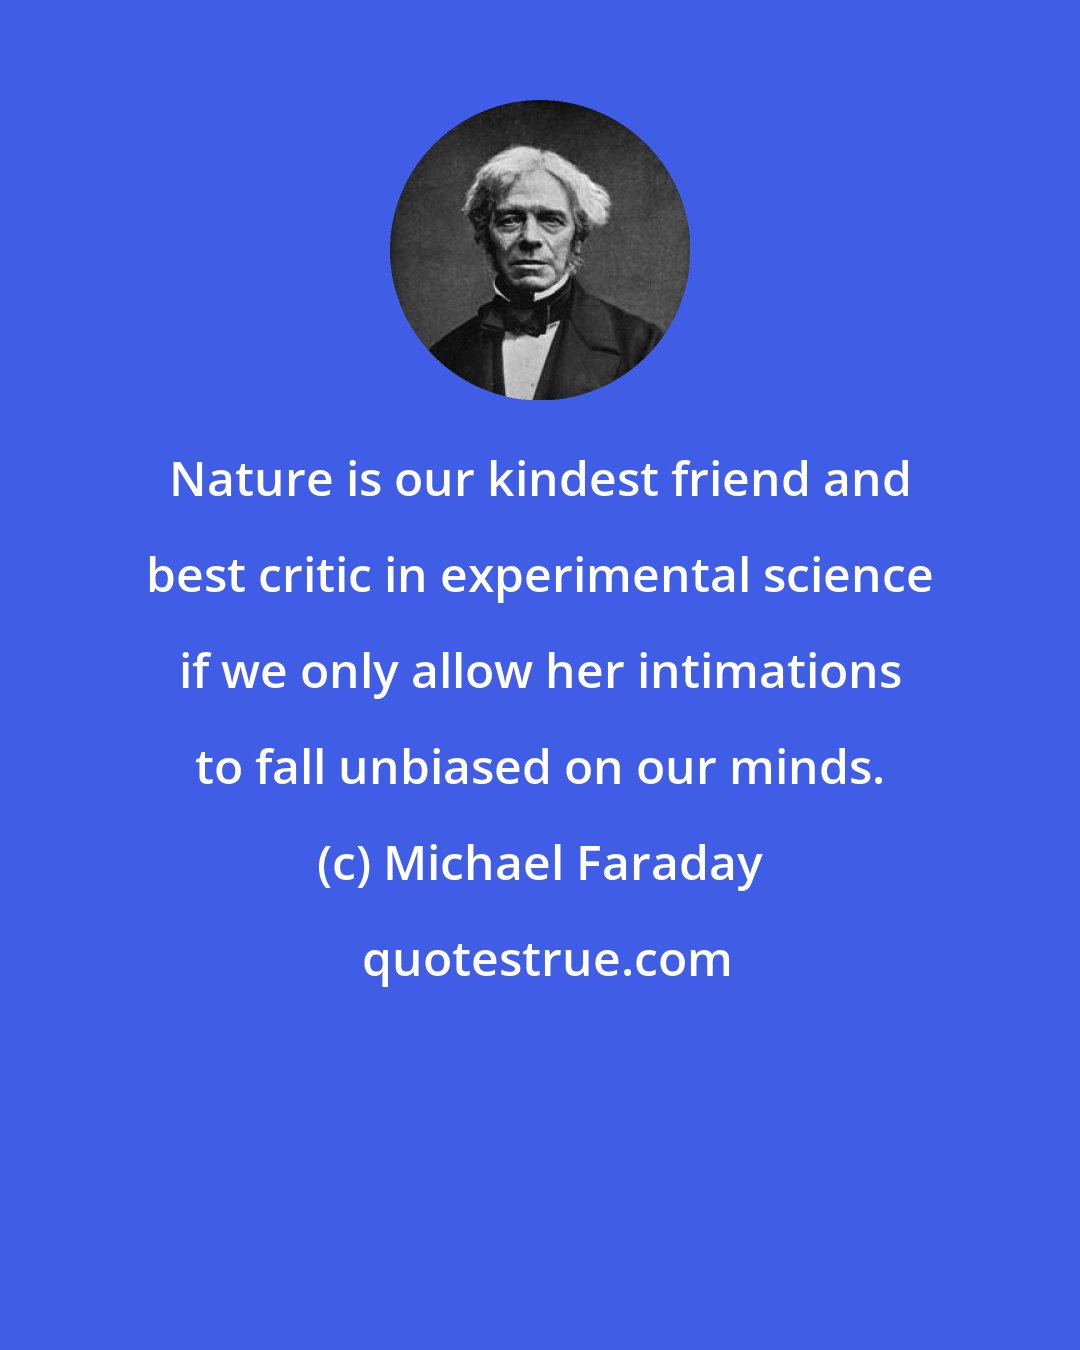 Michael Faraday: Nature is our kindest friend and best critic in experimental science if we only allow her intimations to fall unbiased on our minds.